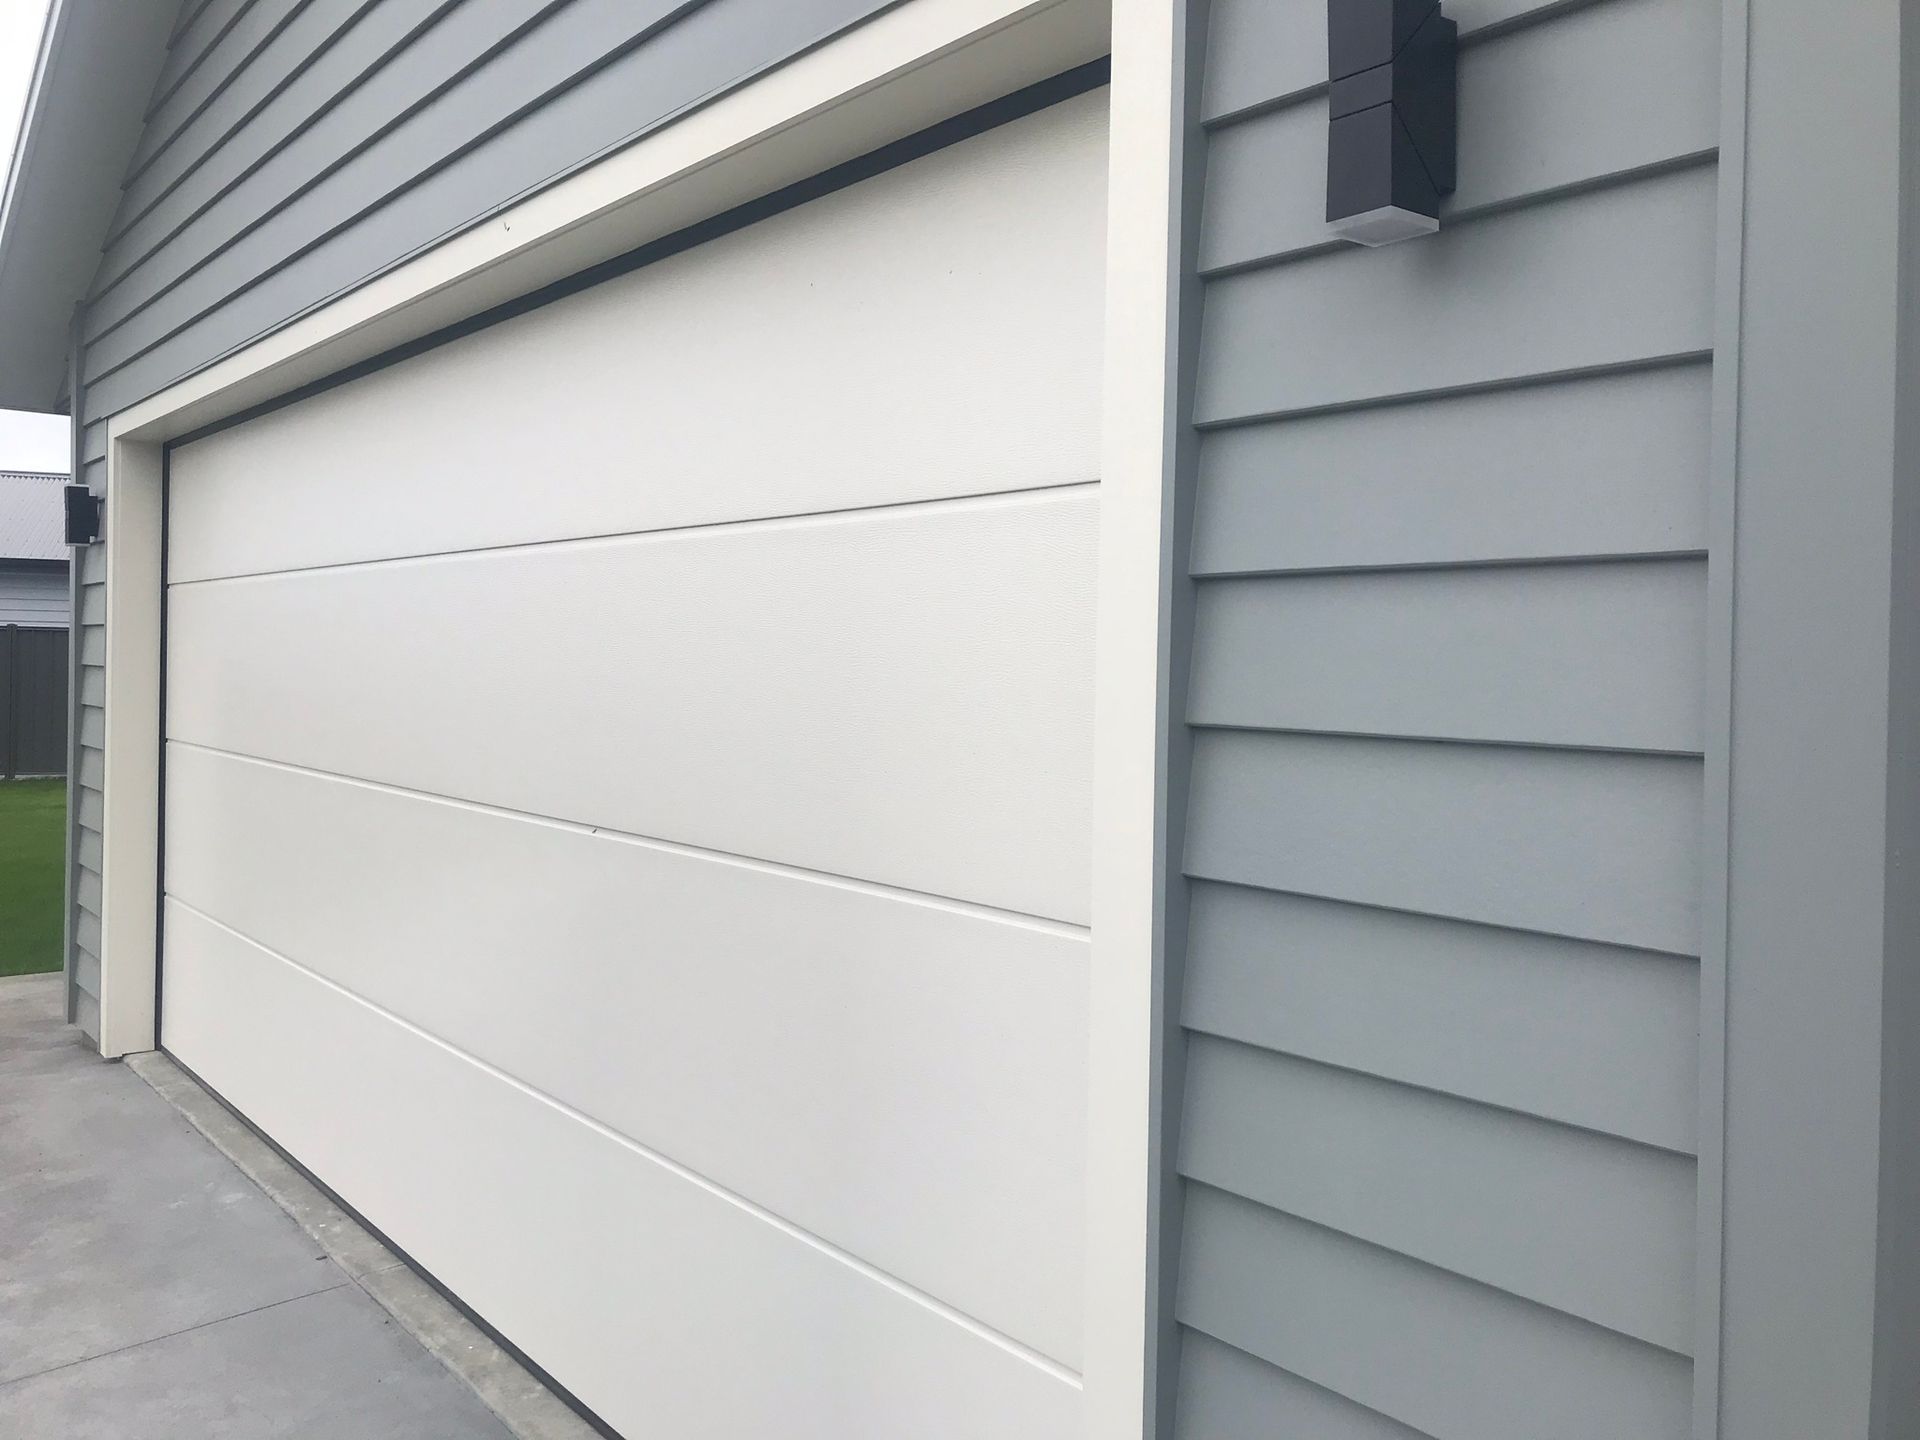 A white garage door is on the side of a house.